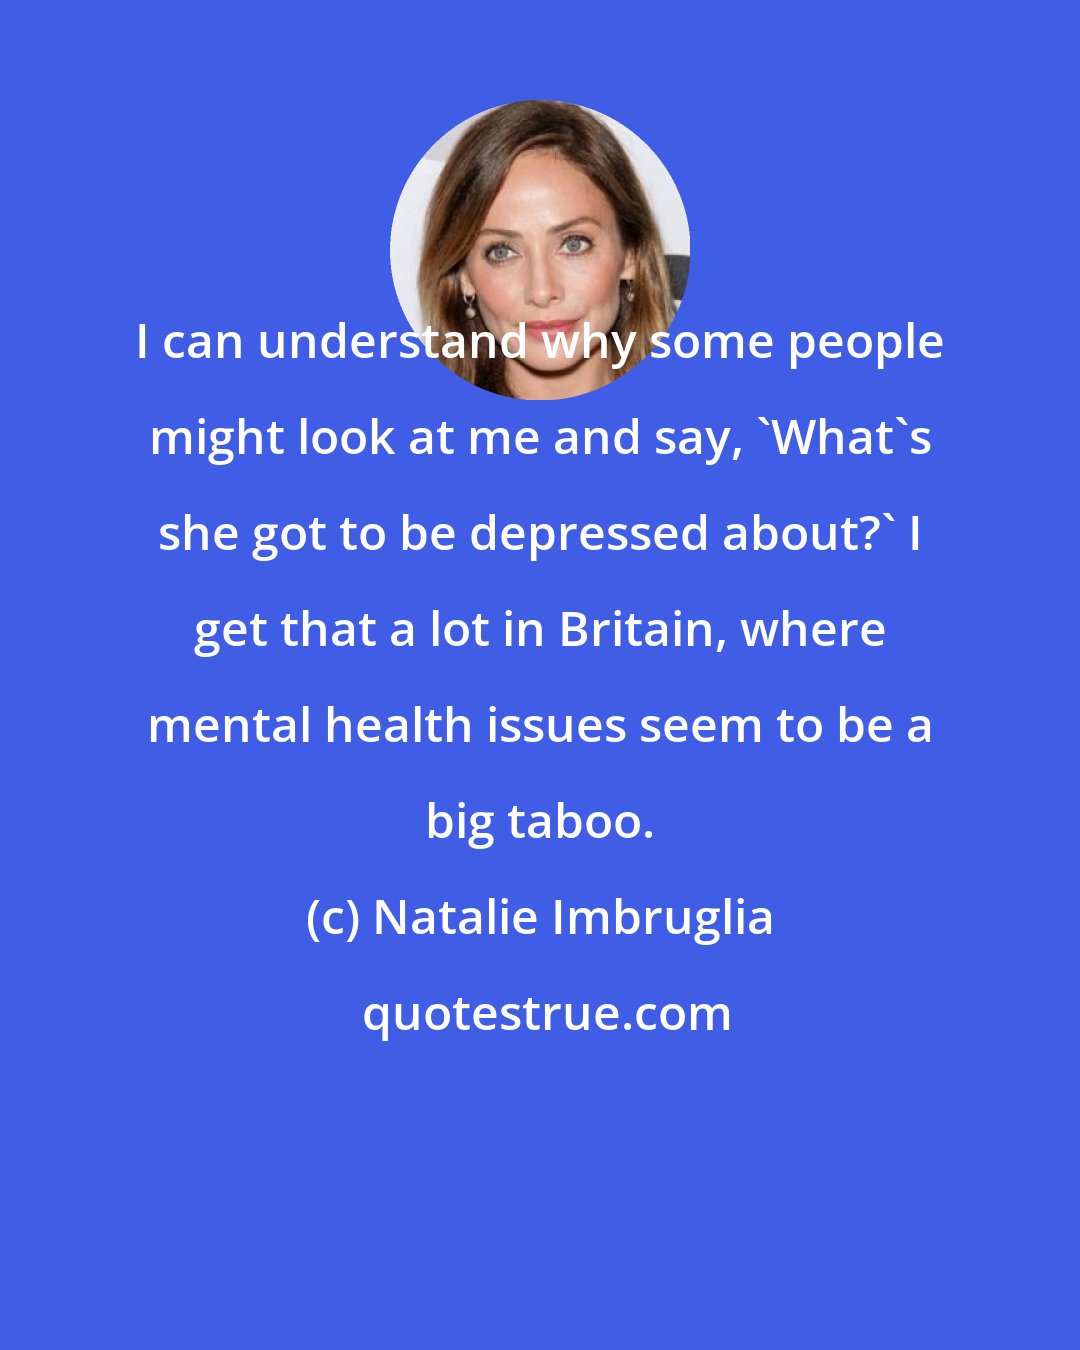 Natalie Imbruglia: I can understand why some people might look at me and say, 'What's she got to be depressed about?' I get that a lot in Britain, where mental health issues seem to be a big taboo.